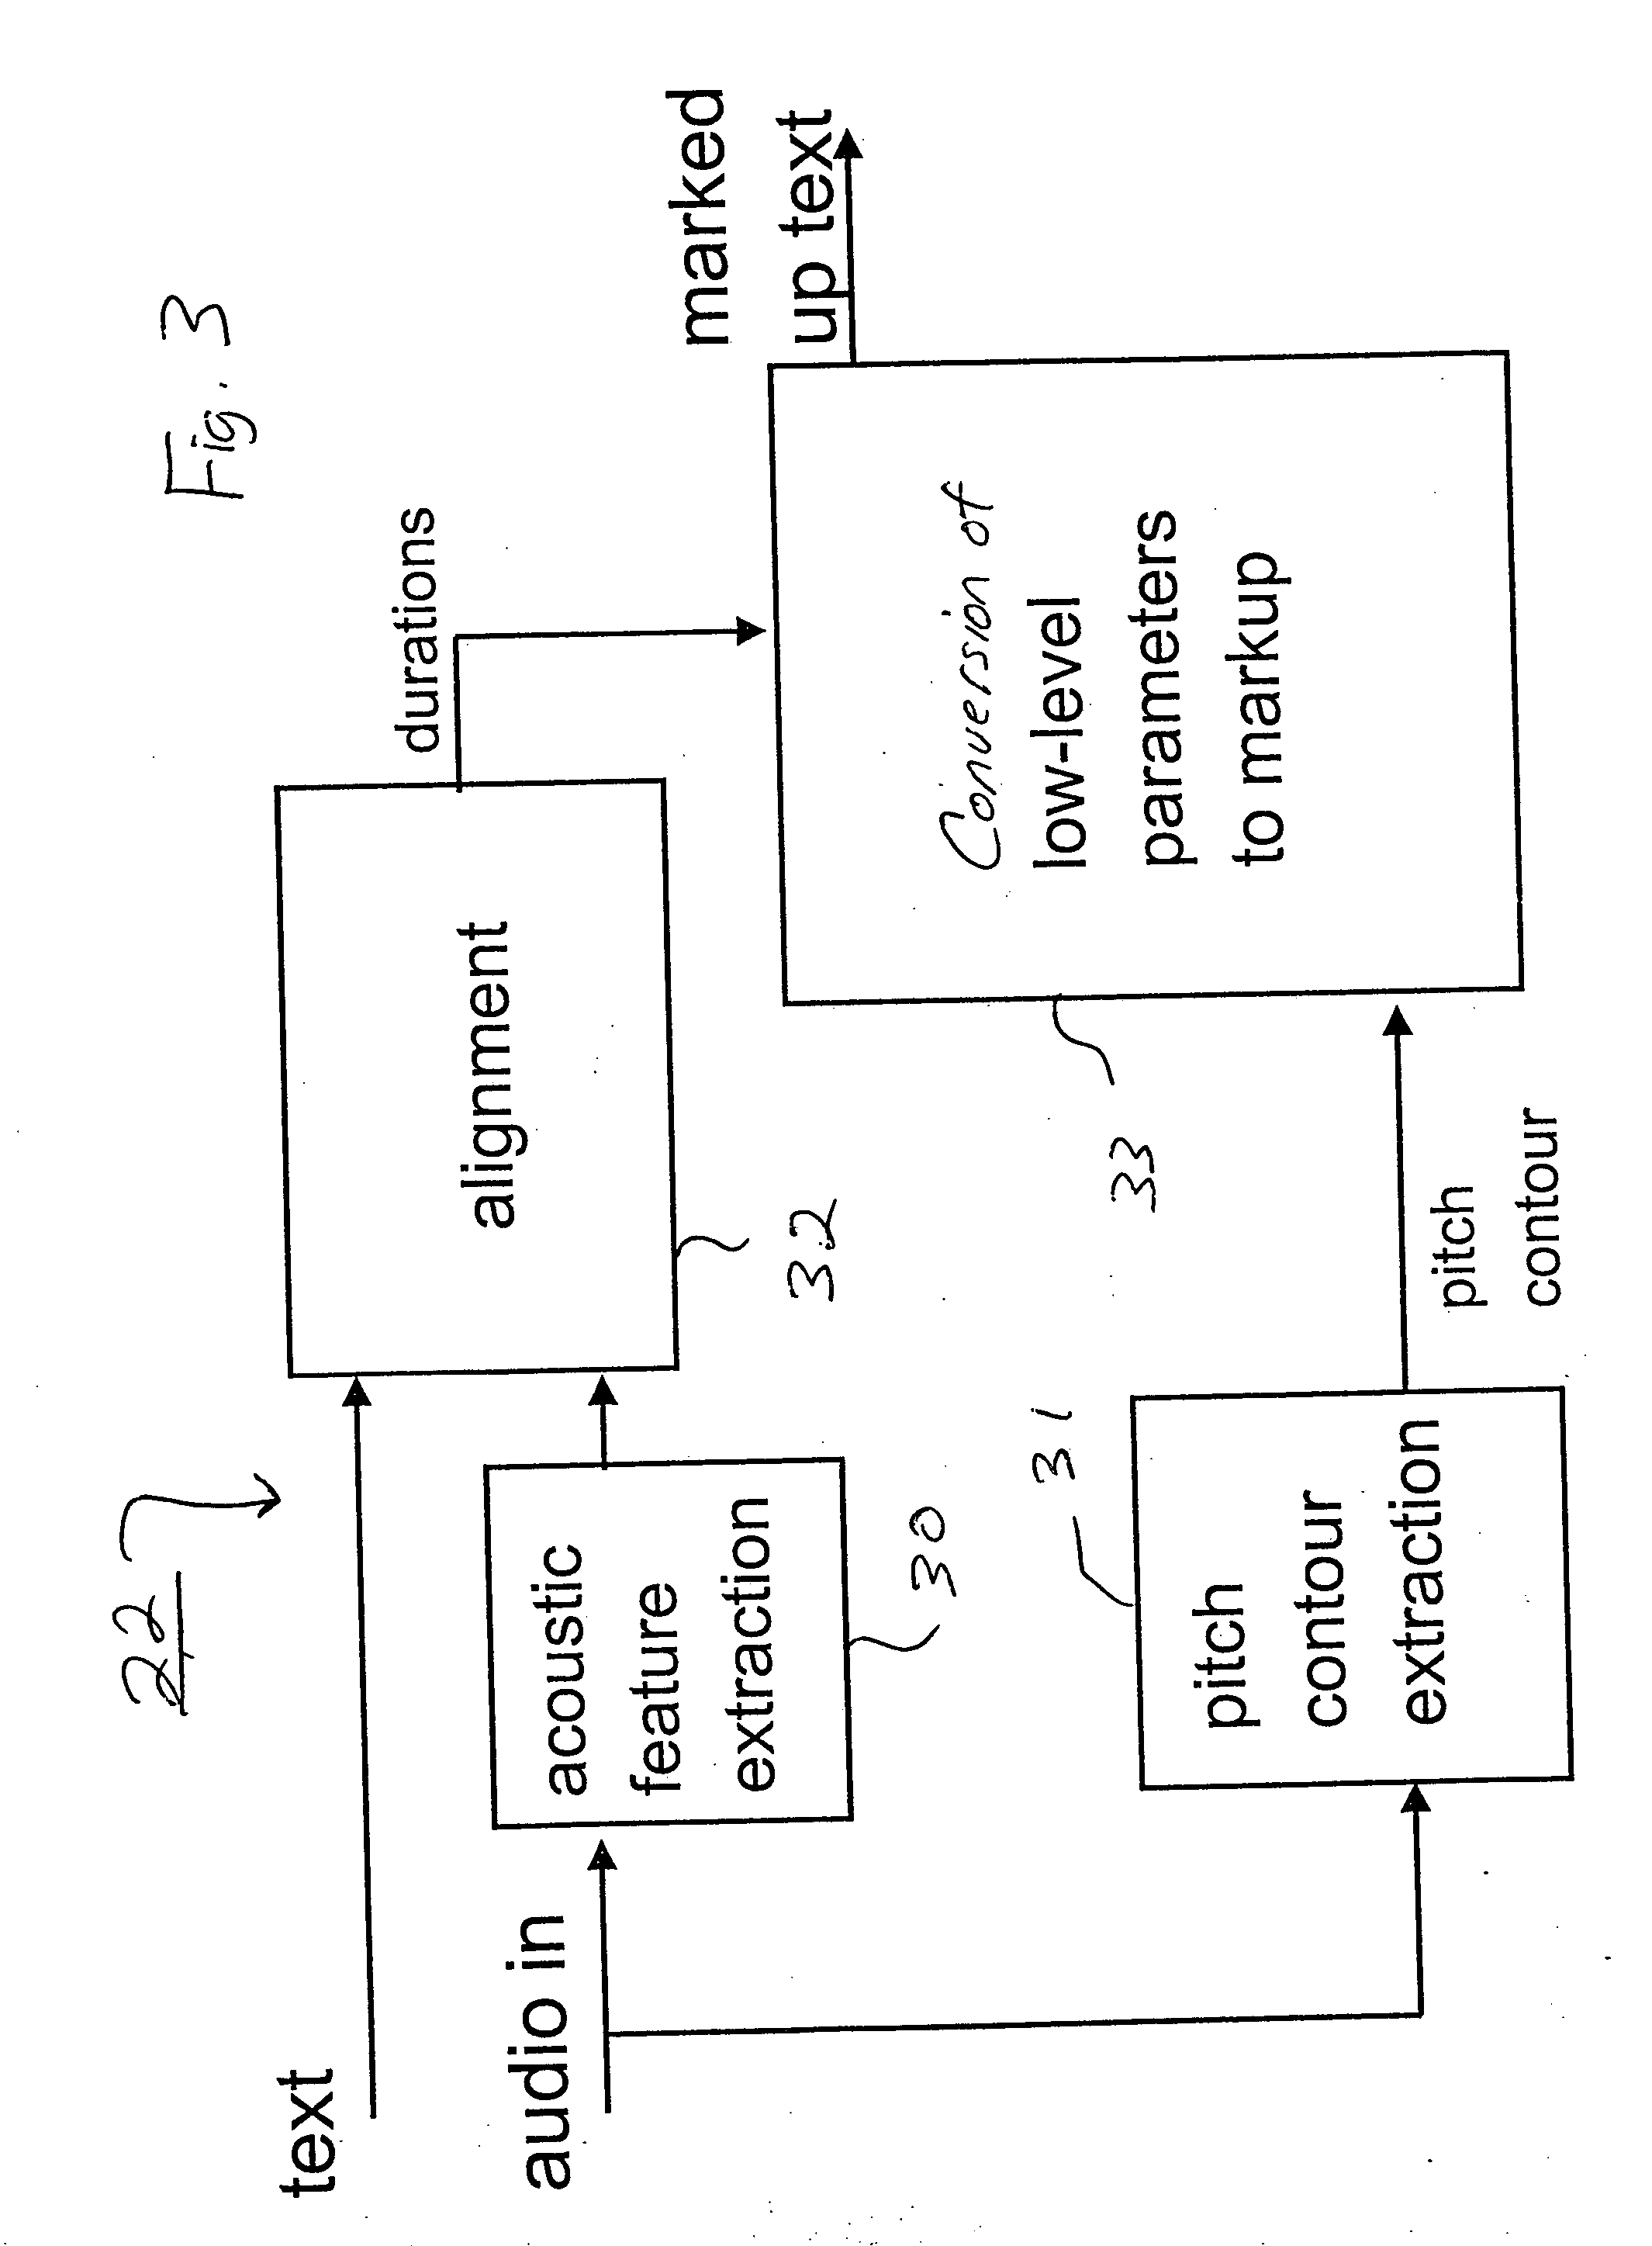 Systems and methods for text-to-speech synthesis using spoken example